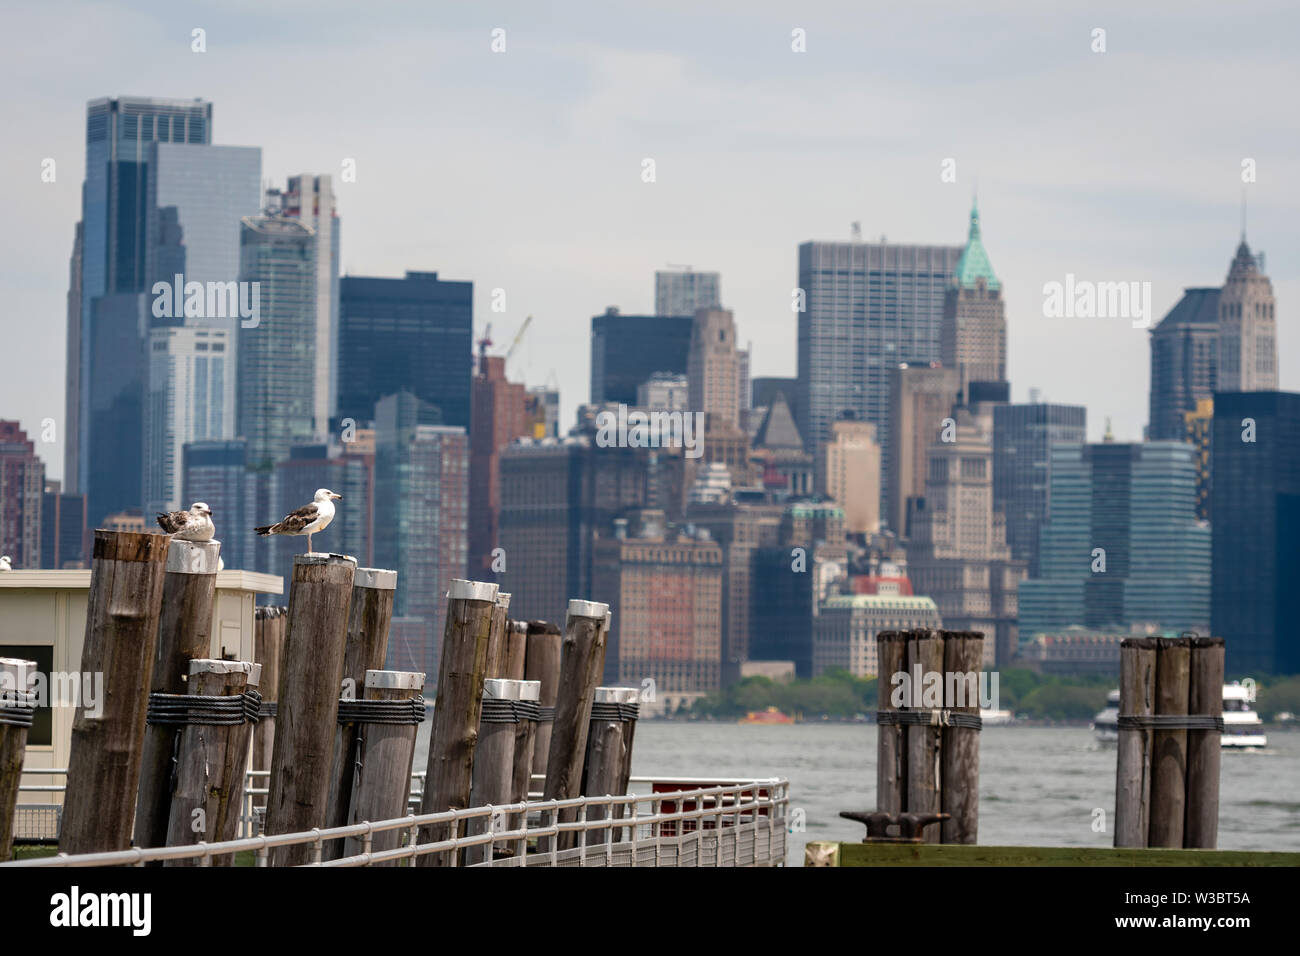 Seagulls at the Old Ferry Dock on Liberty Island near New York City, USA - Image Stock Photo